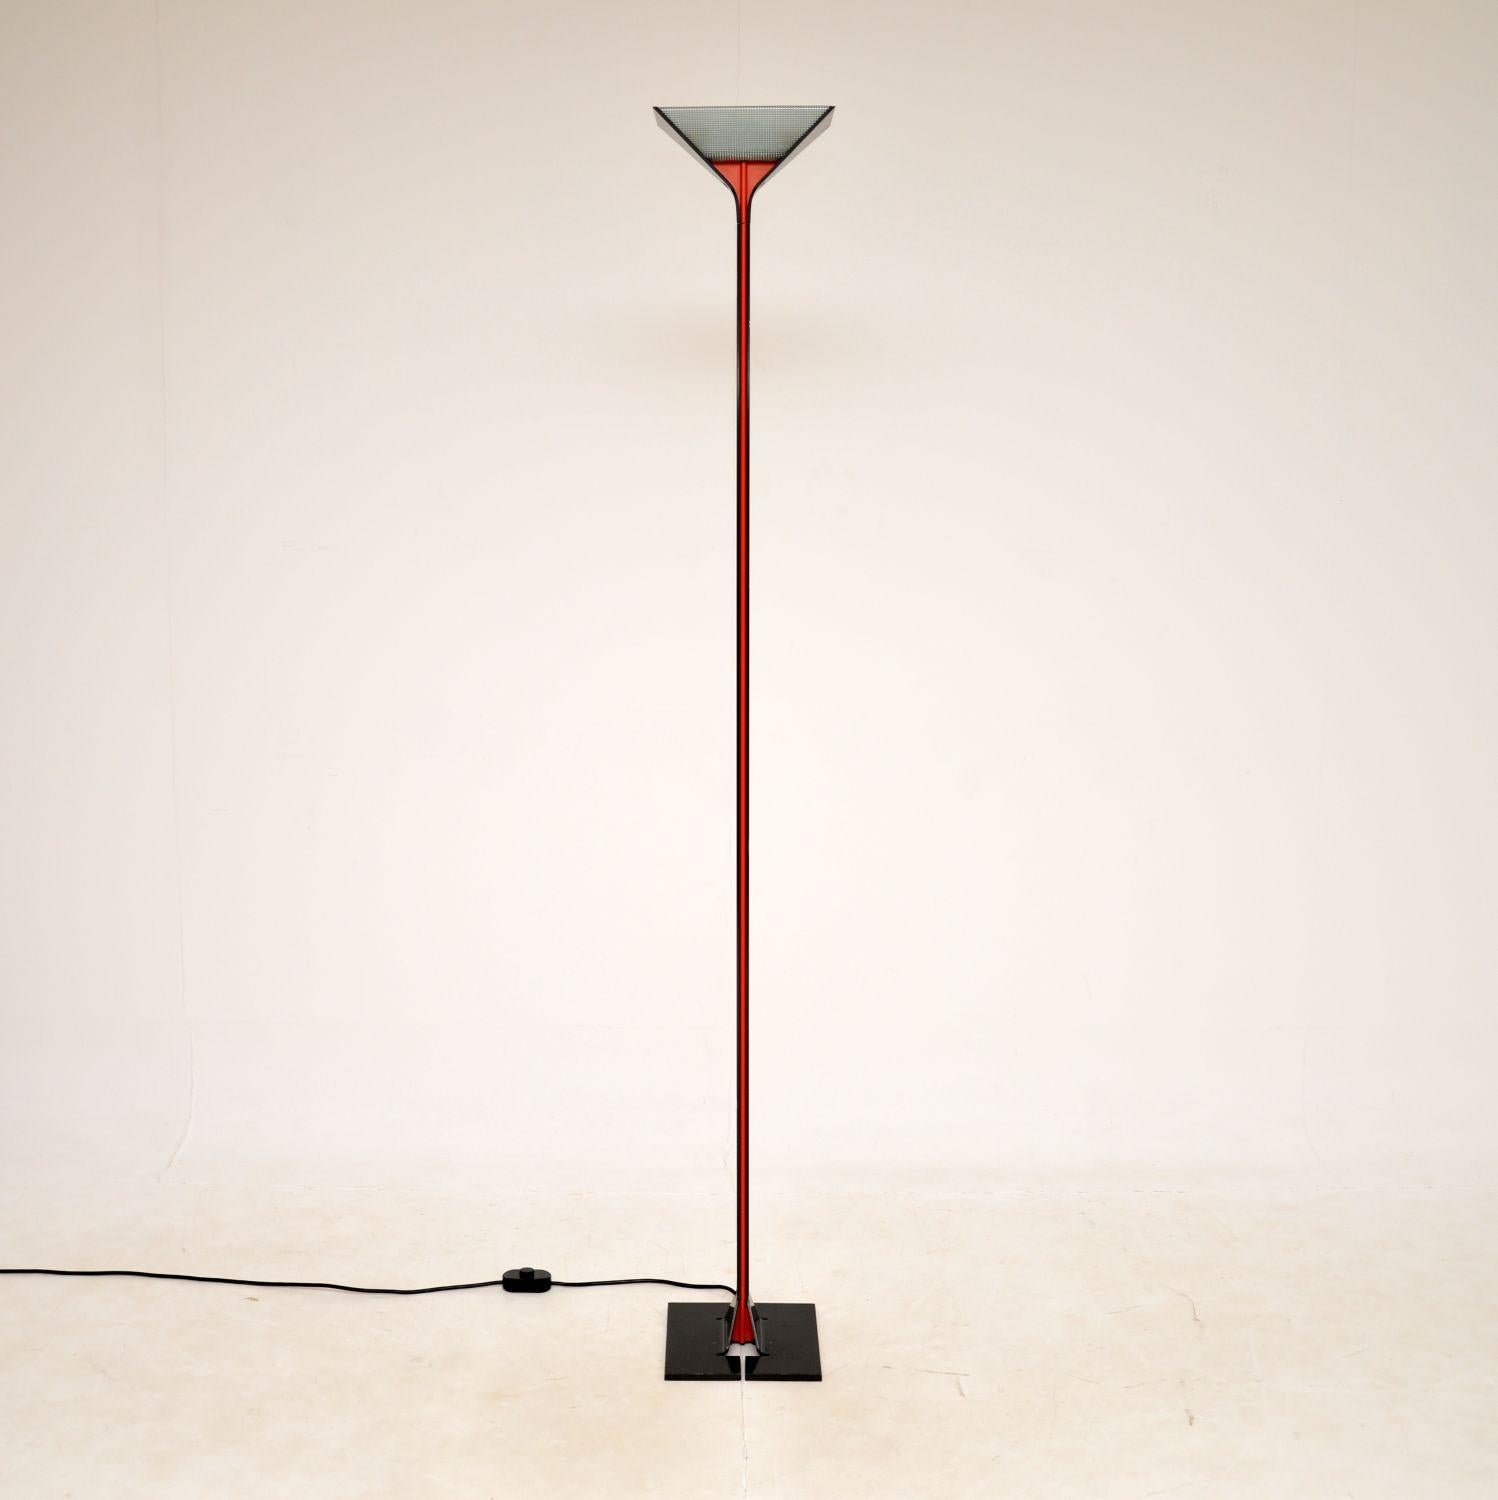 Flos Papillona - 14 For Sale on 1stDibs | flos papillona floor lamp, flos, flos papillona 750